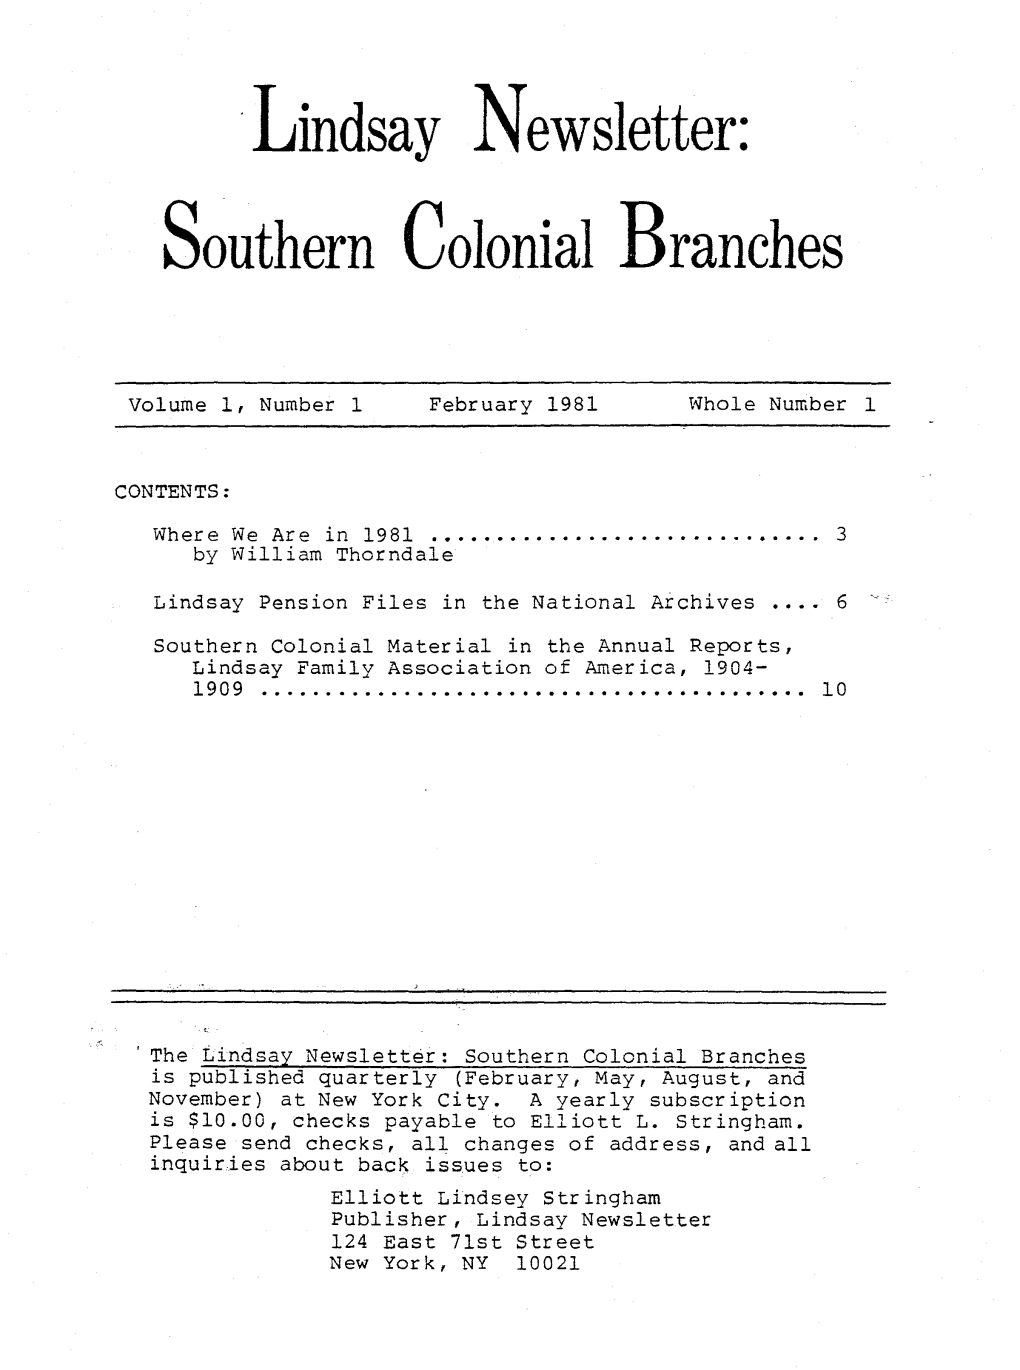 ·Lindsay Newsletter: Southern Colonial Branches